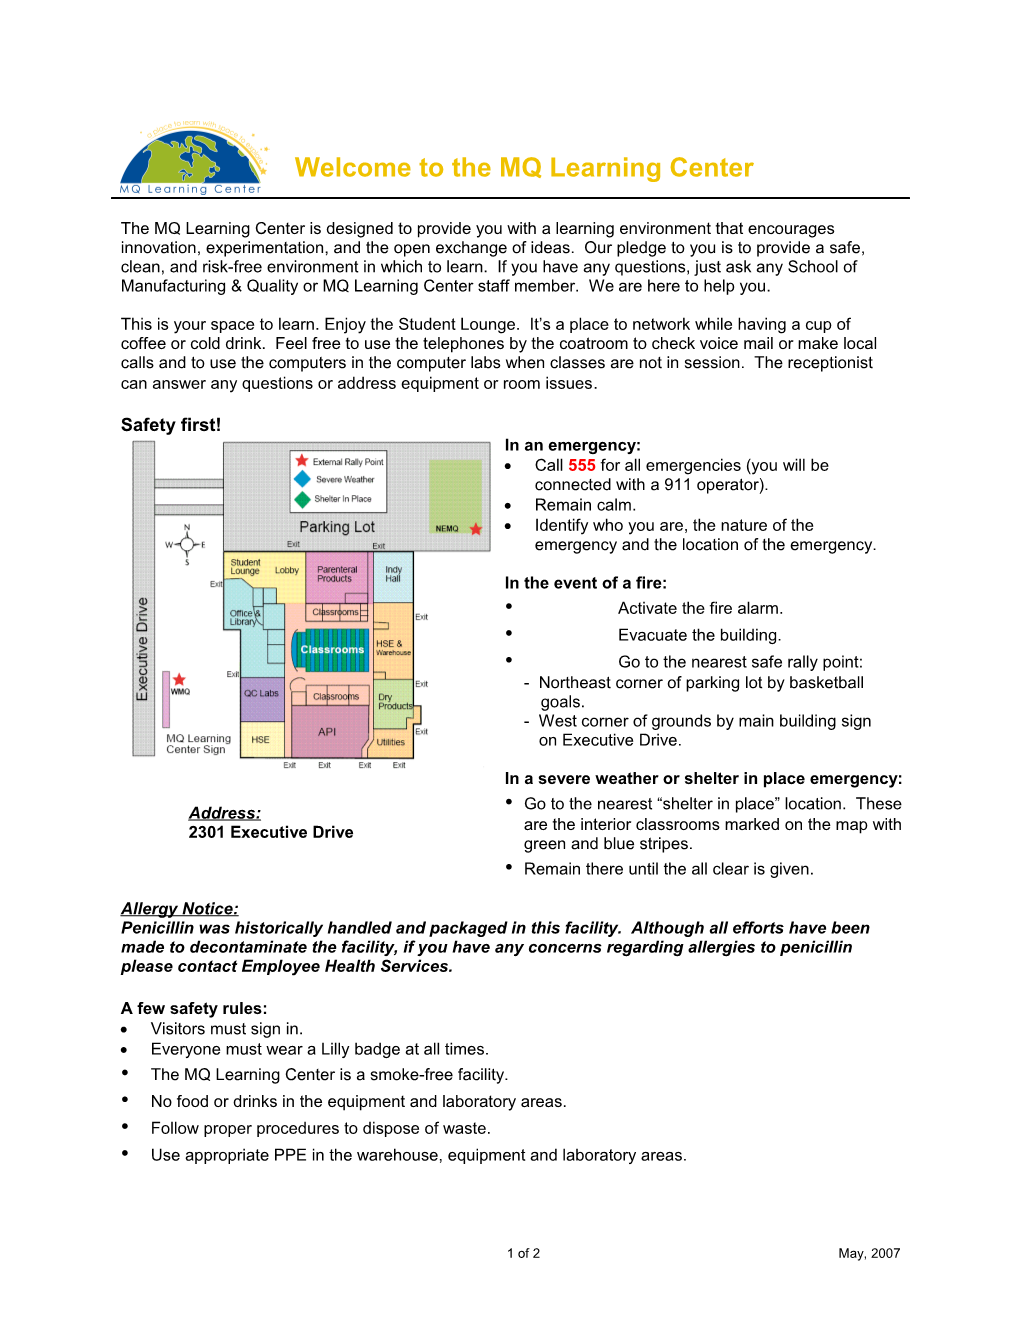 We Designed the MQ Learning Center to Provide You